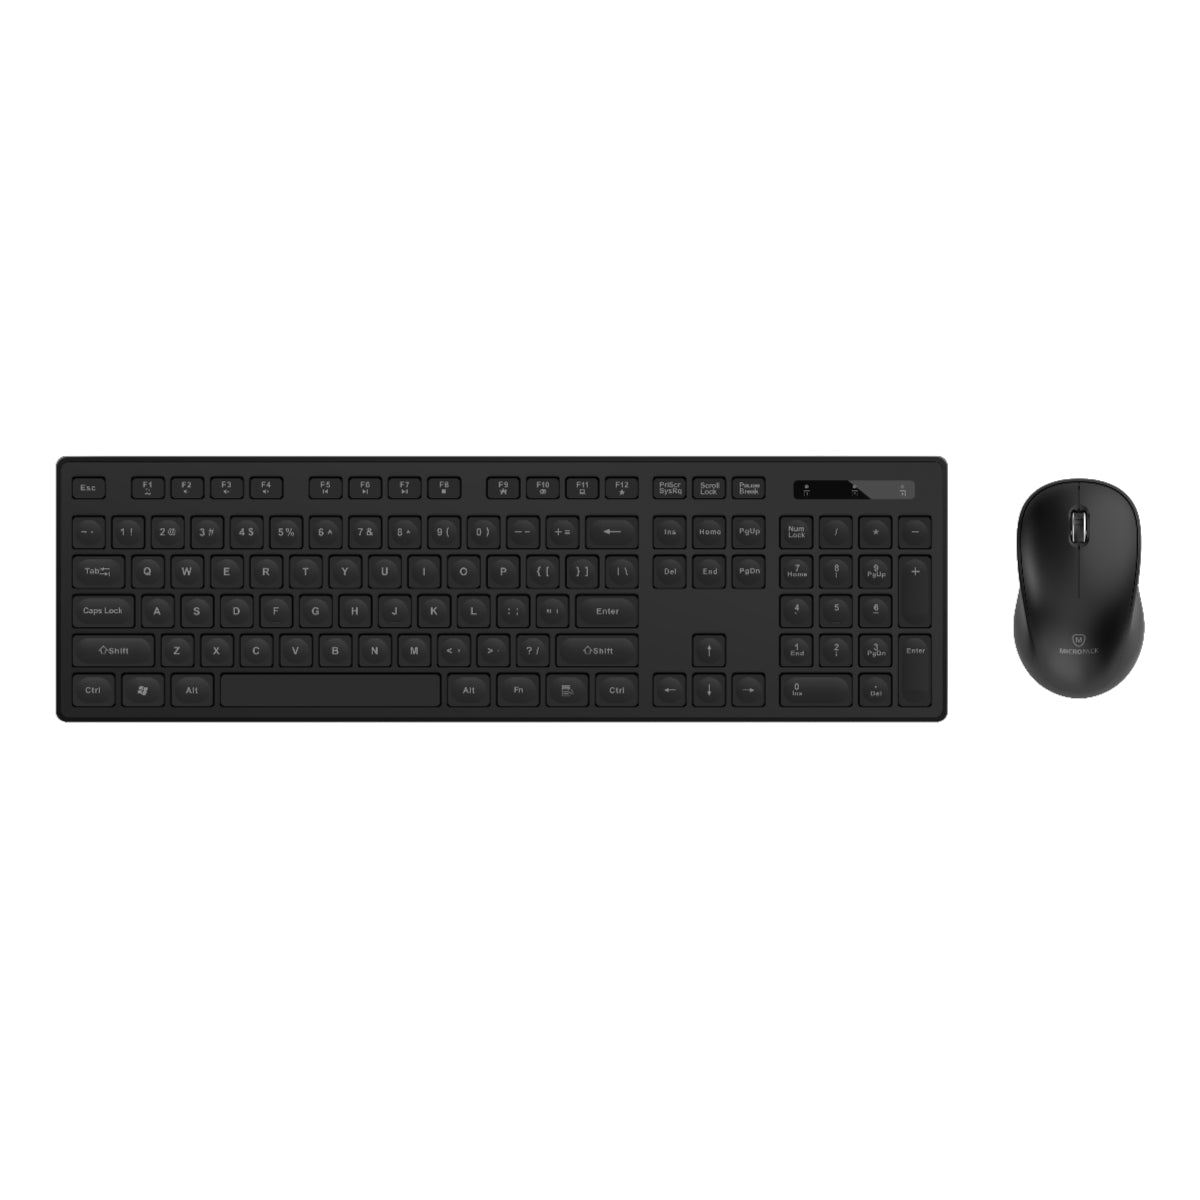 USB Wireless Mouse and Keyboard Combo for Laptop Computer KM-237W black